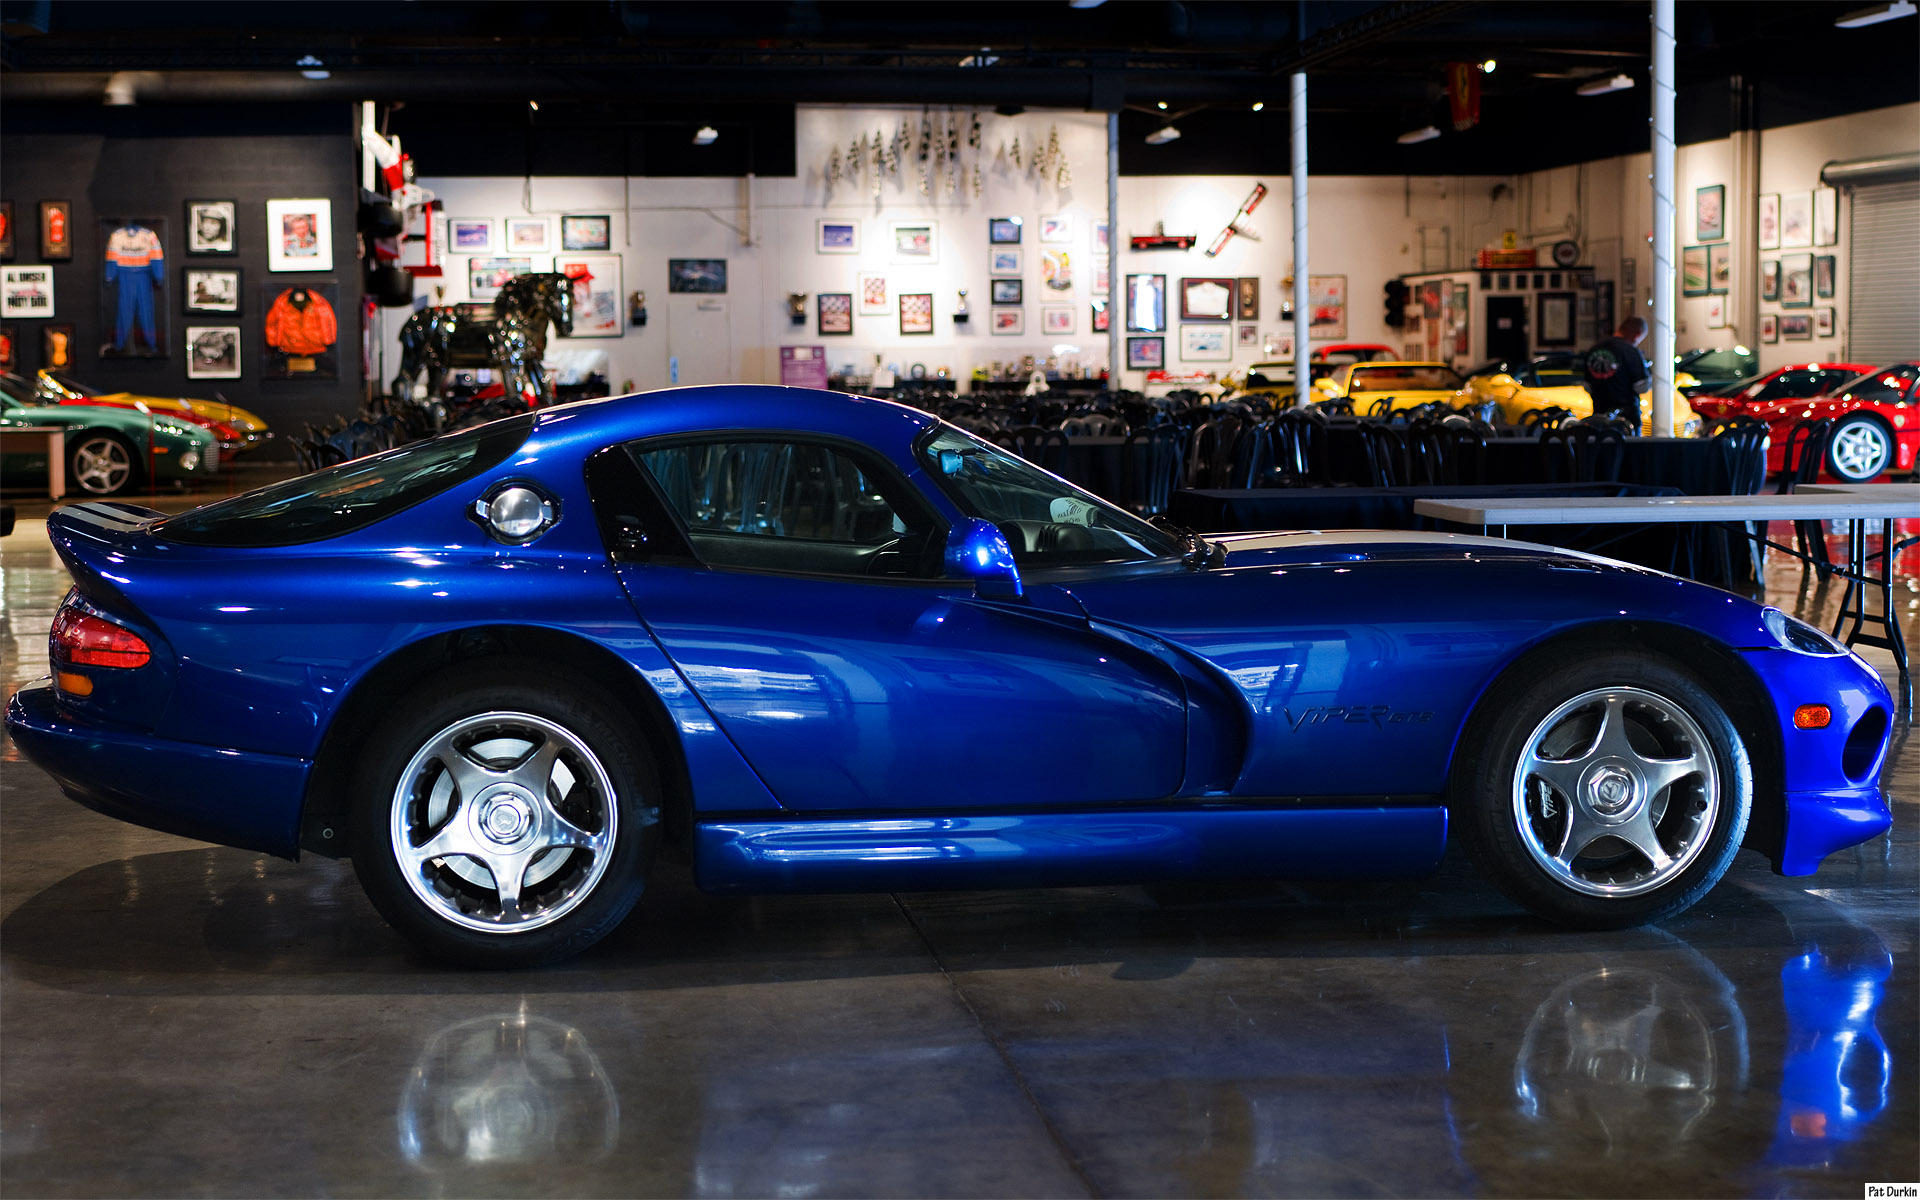 1996 Dodge Viper GTS coupe - blue - RH side | Flickr - Photo Sharing!